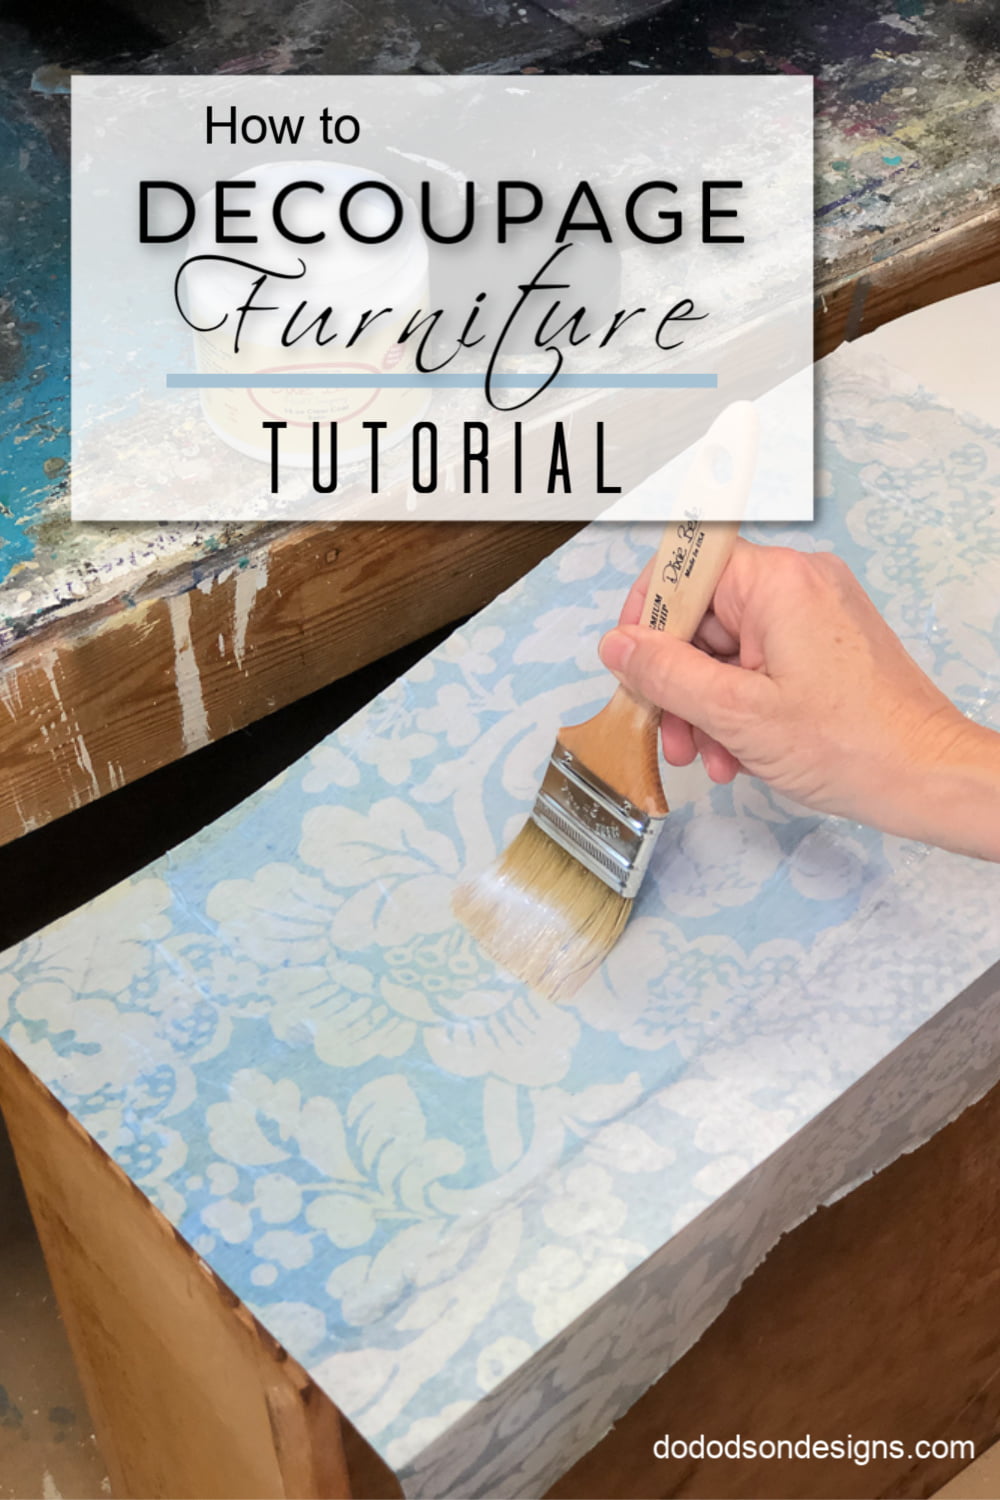 How To Decoupage Furniture  Tutorial - Do Dodson Designs